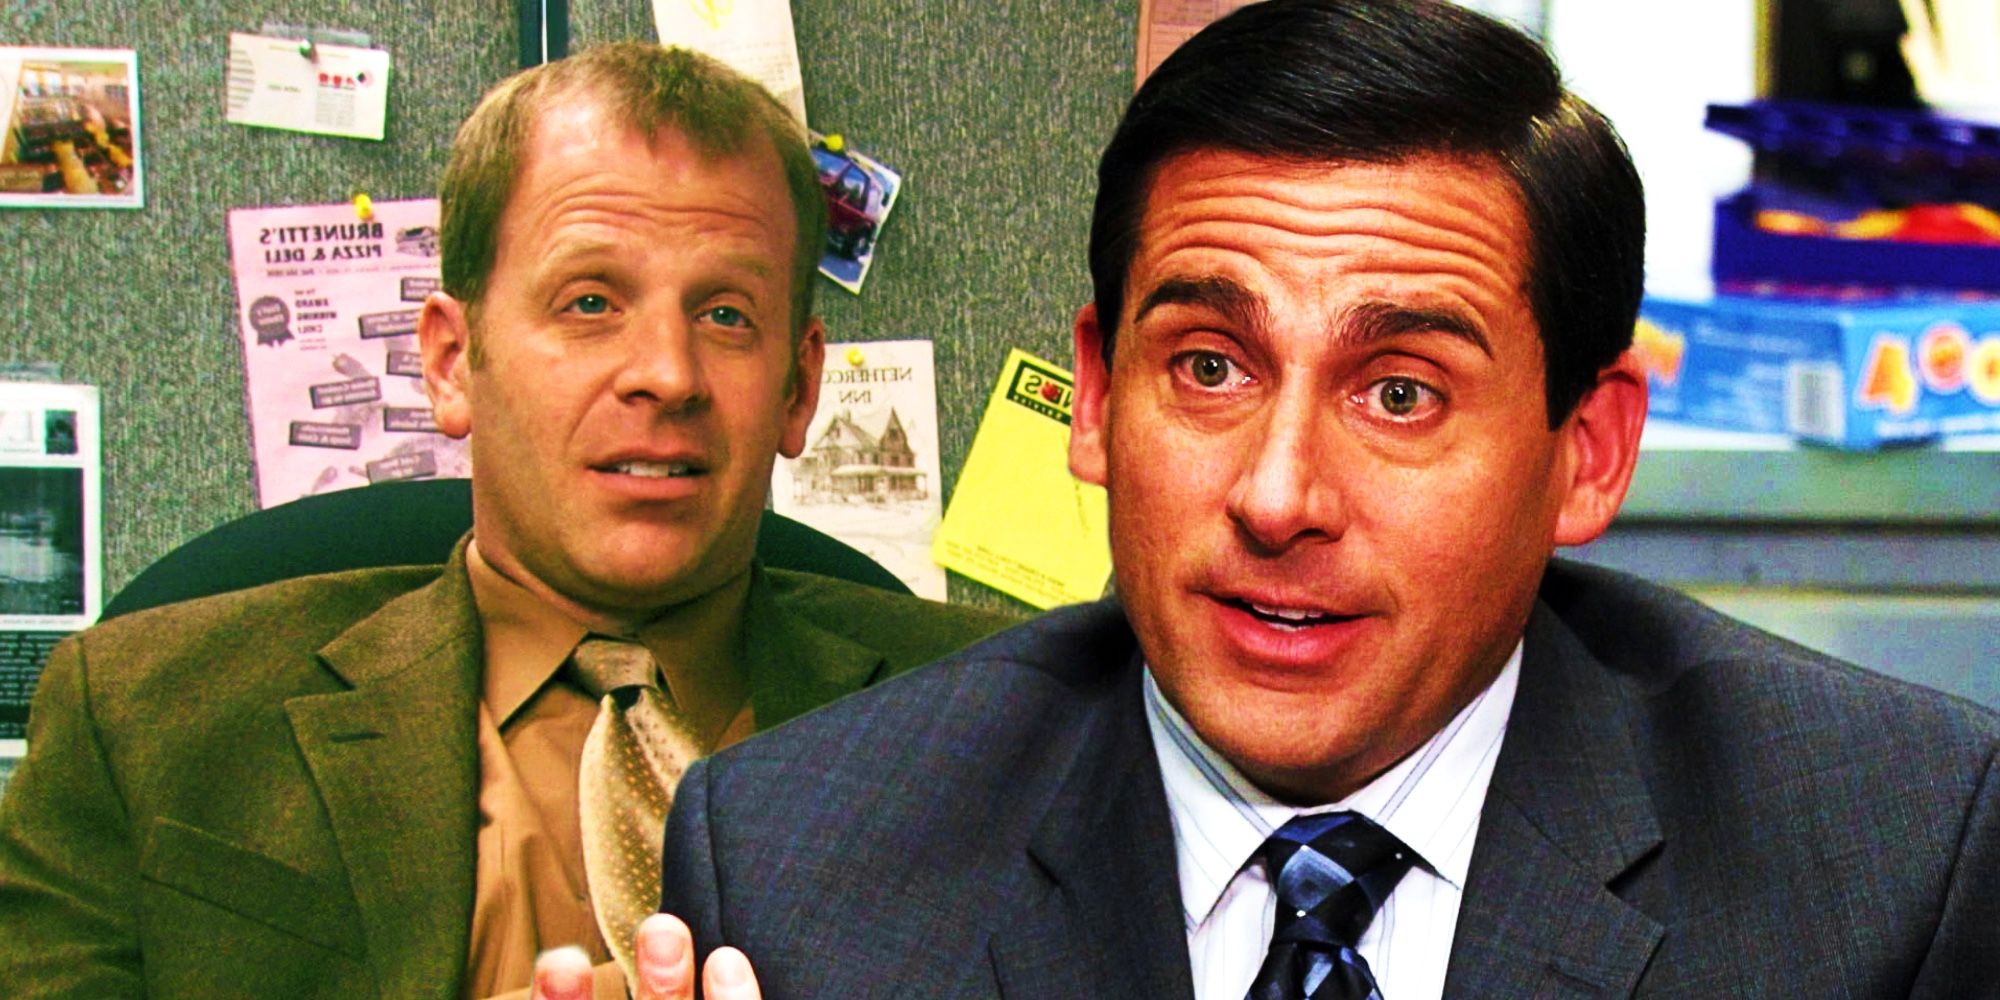 The Best of Toby Flenderson (Without Michael) - The Office 